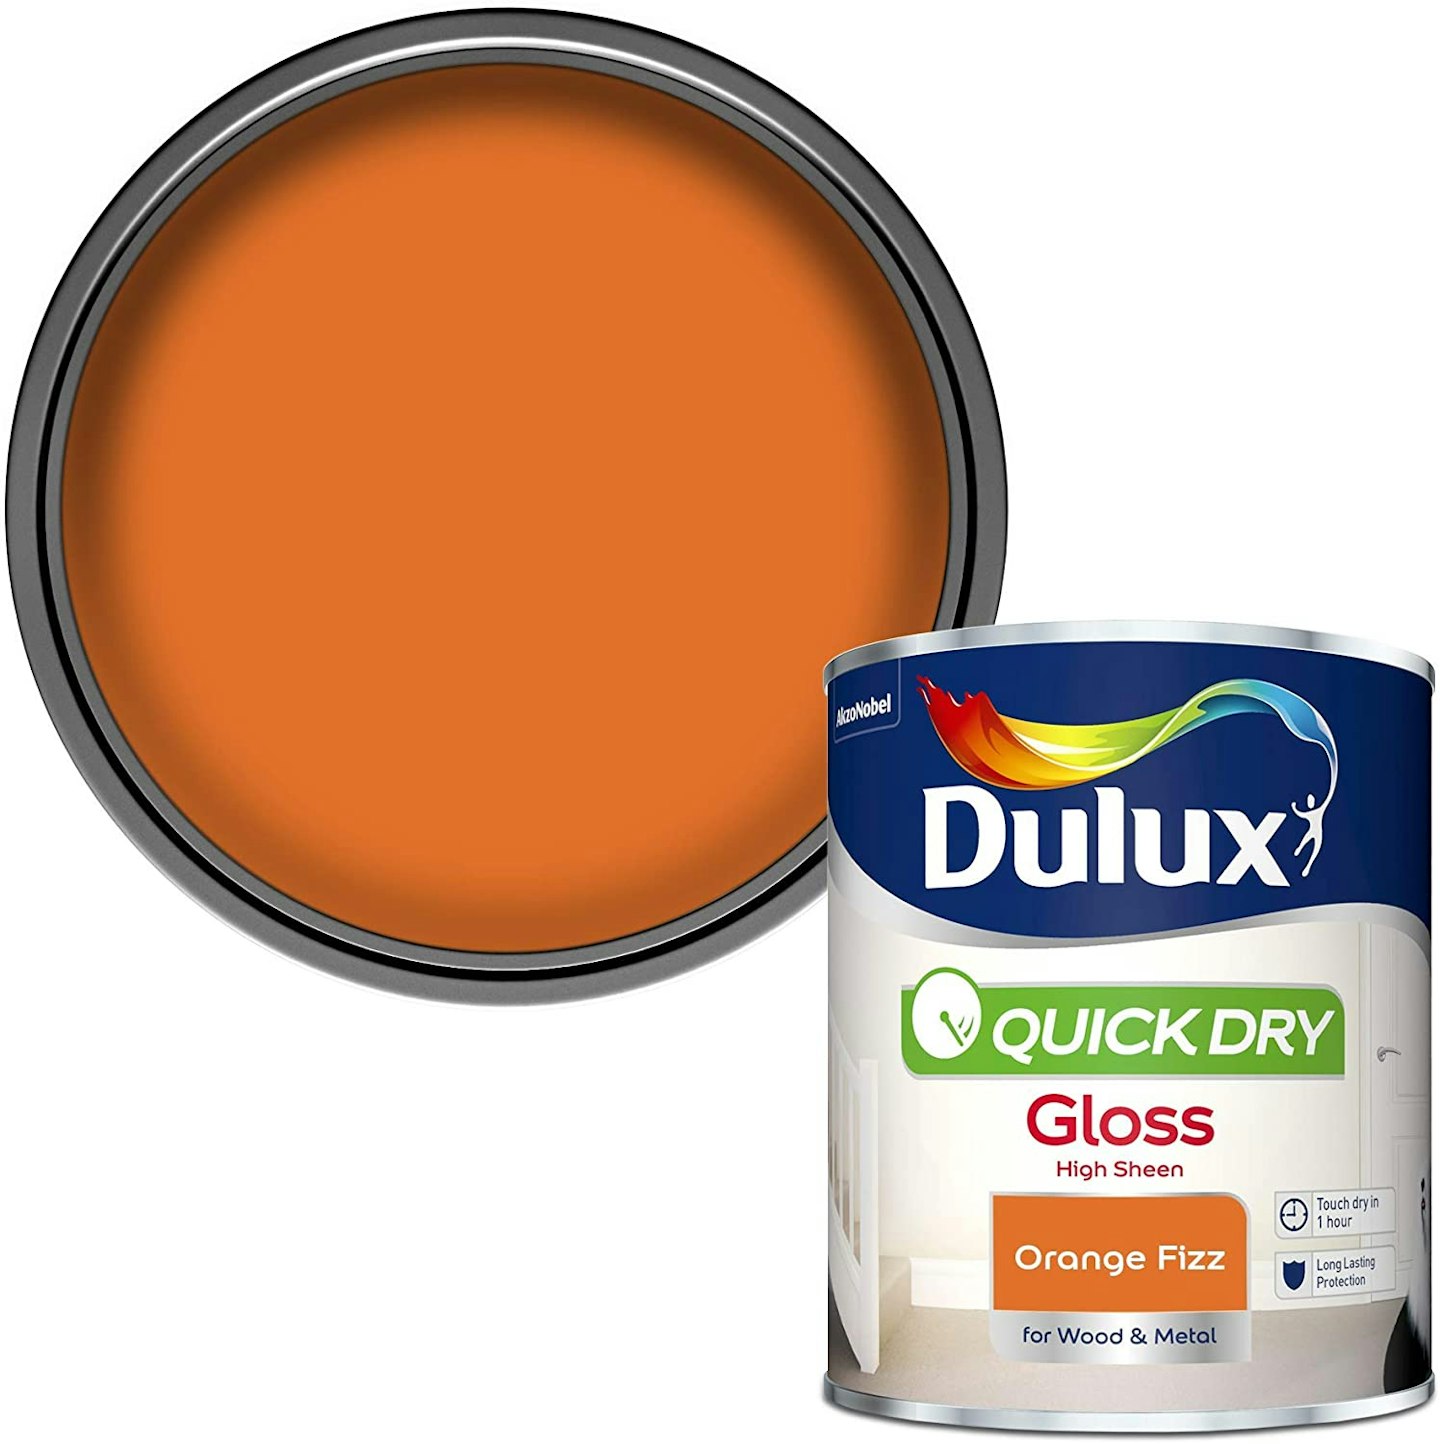 Dulux Quick Dry Gloss Paint For Wood And Metal